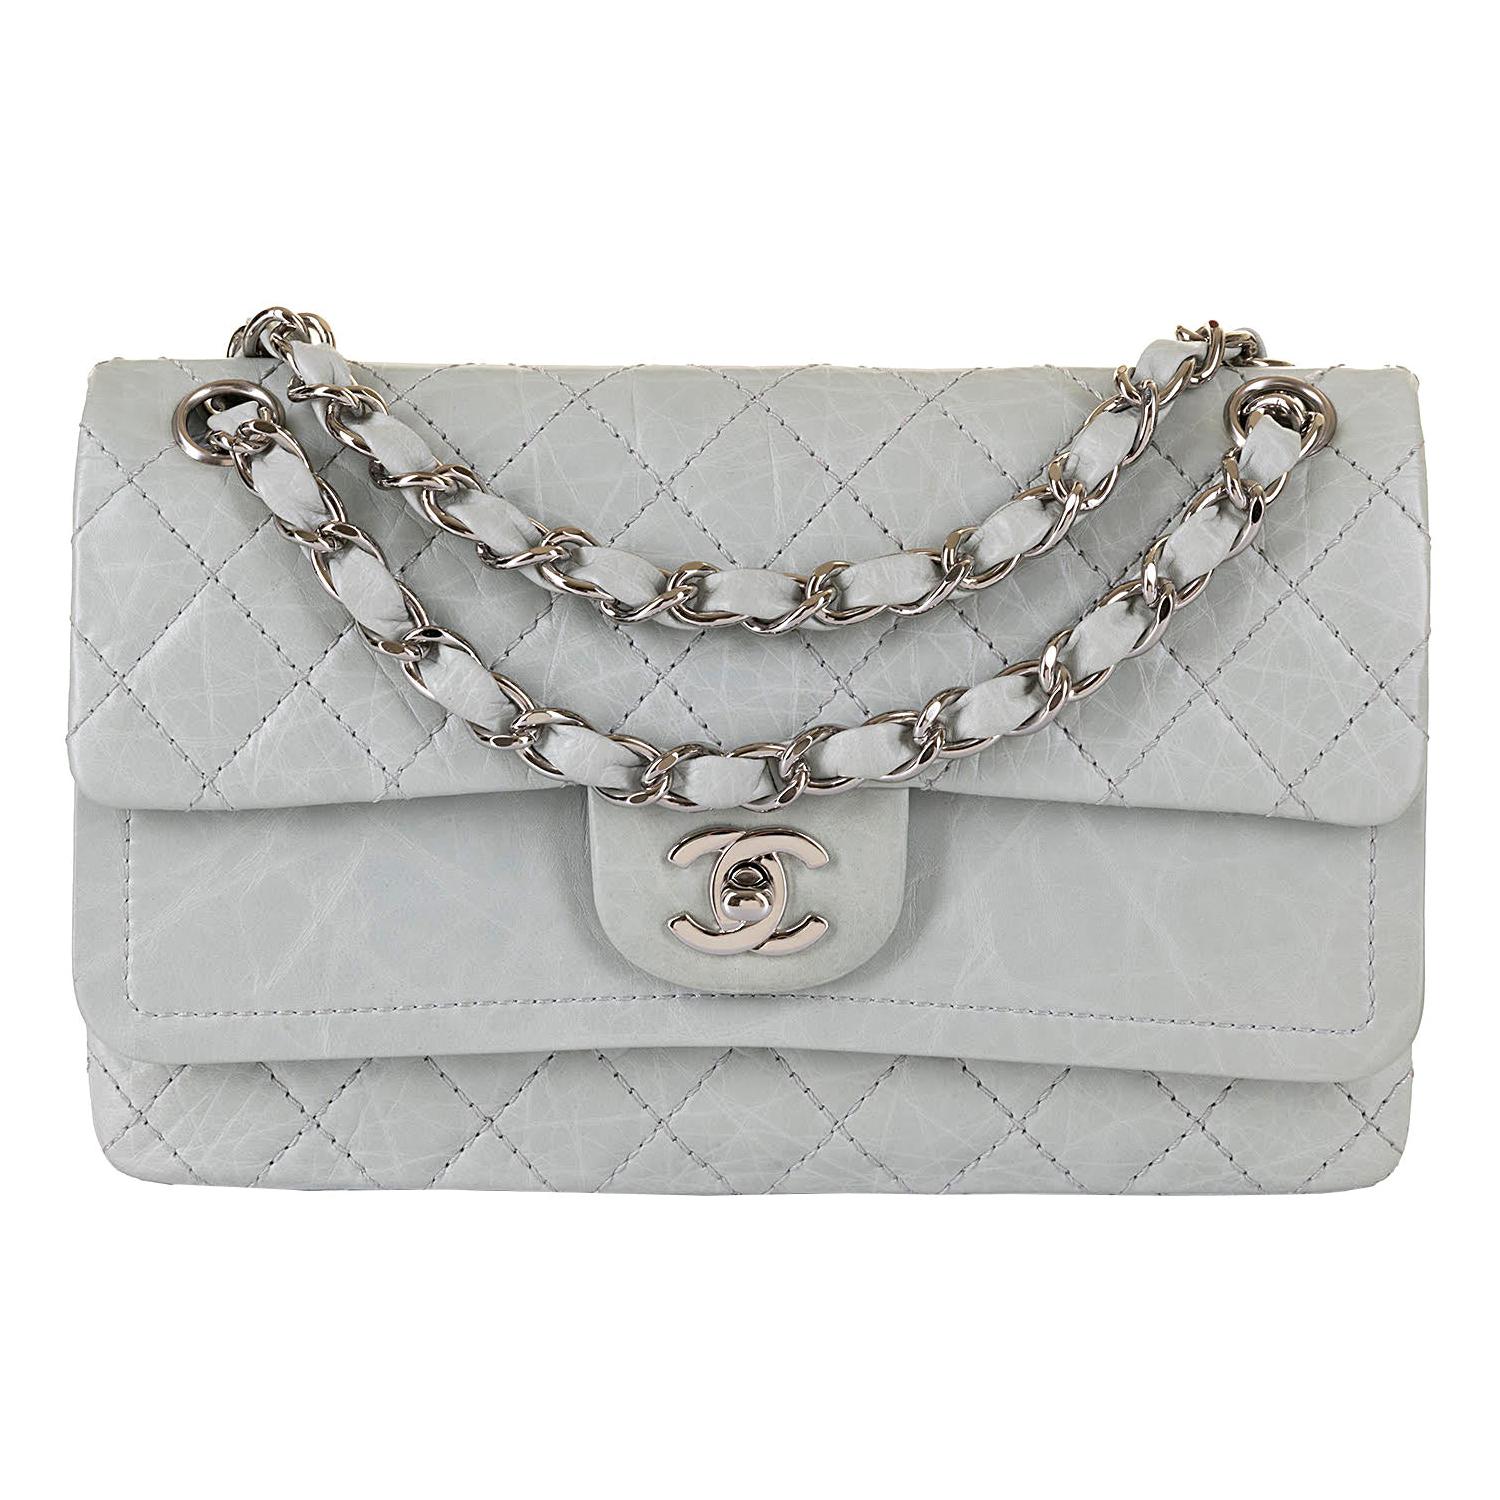 Chanel 'Eau-de-Nil' Quilted Double Flap Medium Bag with Silver Hardware - Rare